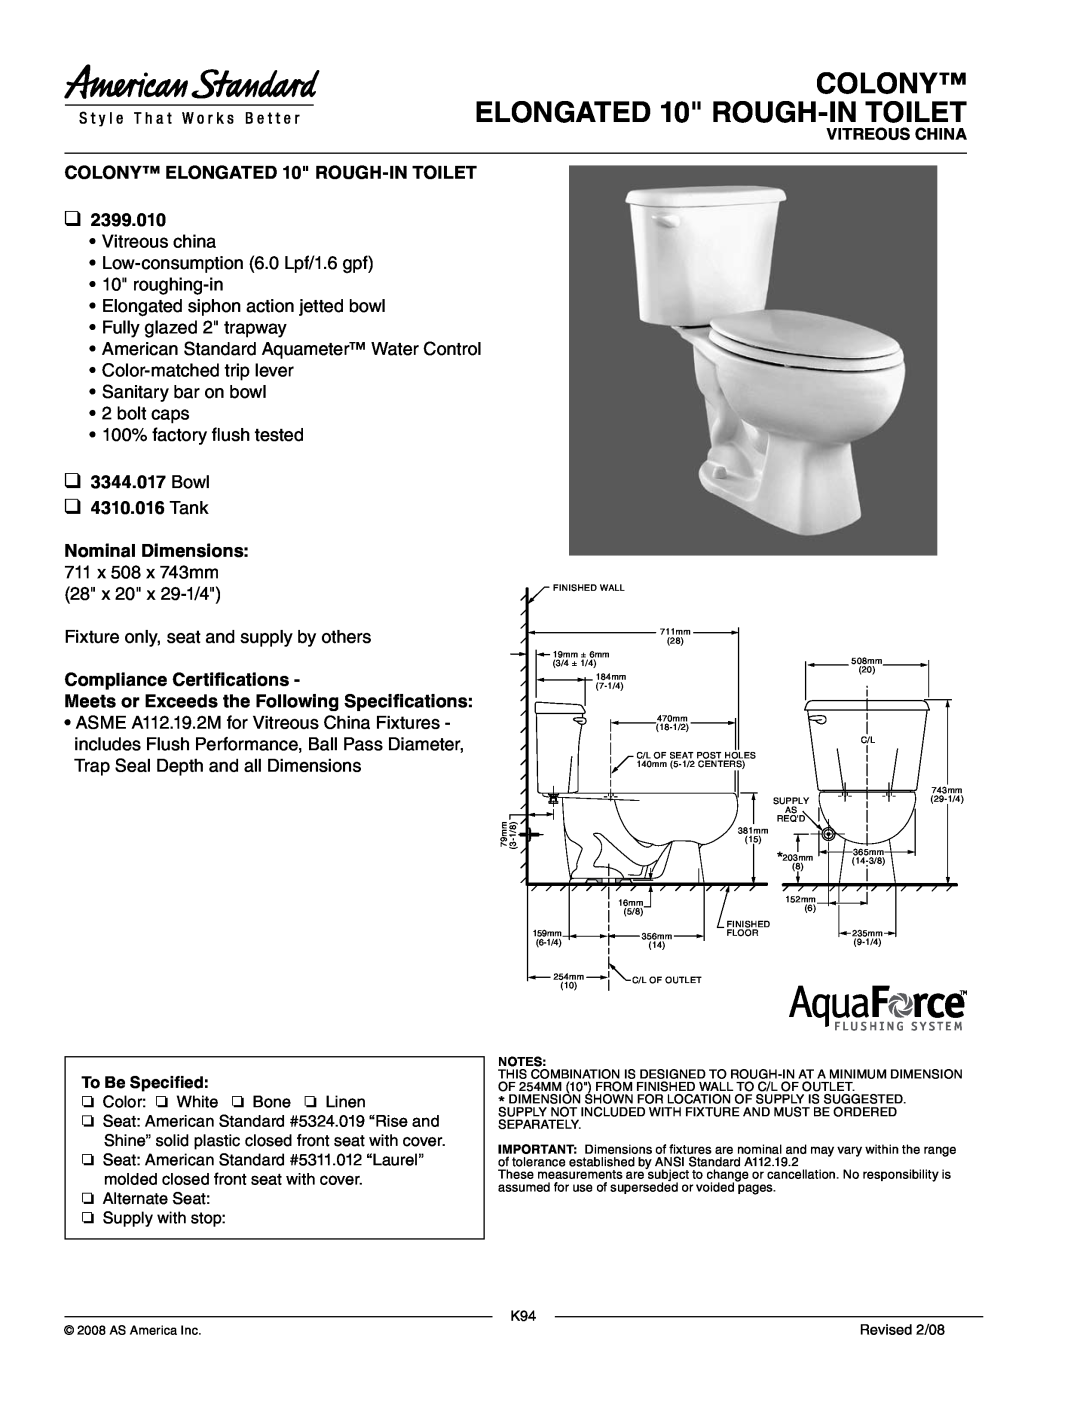 American Standard 2399.010 dimensions COLONY ELONGATED 10 ROUGH-INTOILET, Bowl 4310.016 Tank, Compliance Certifications 